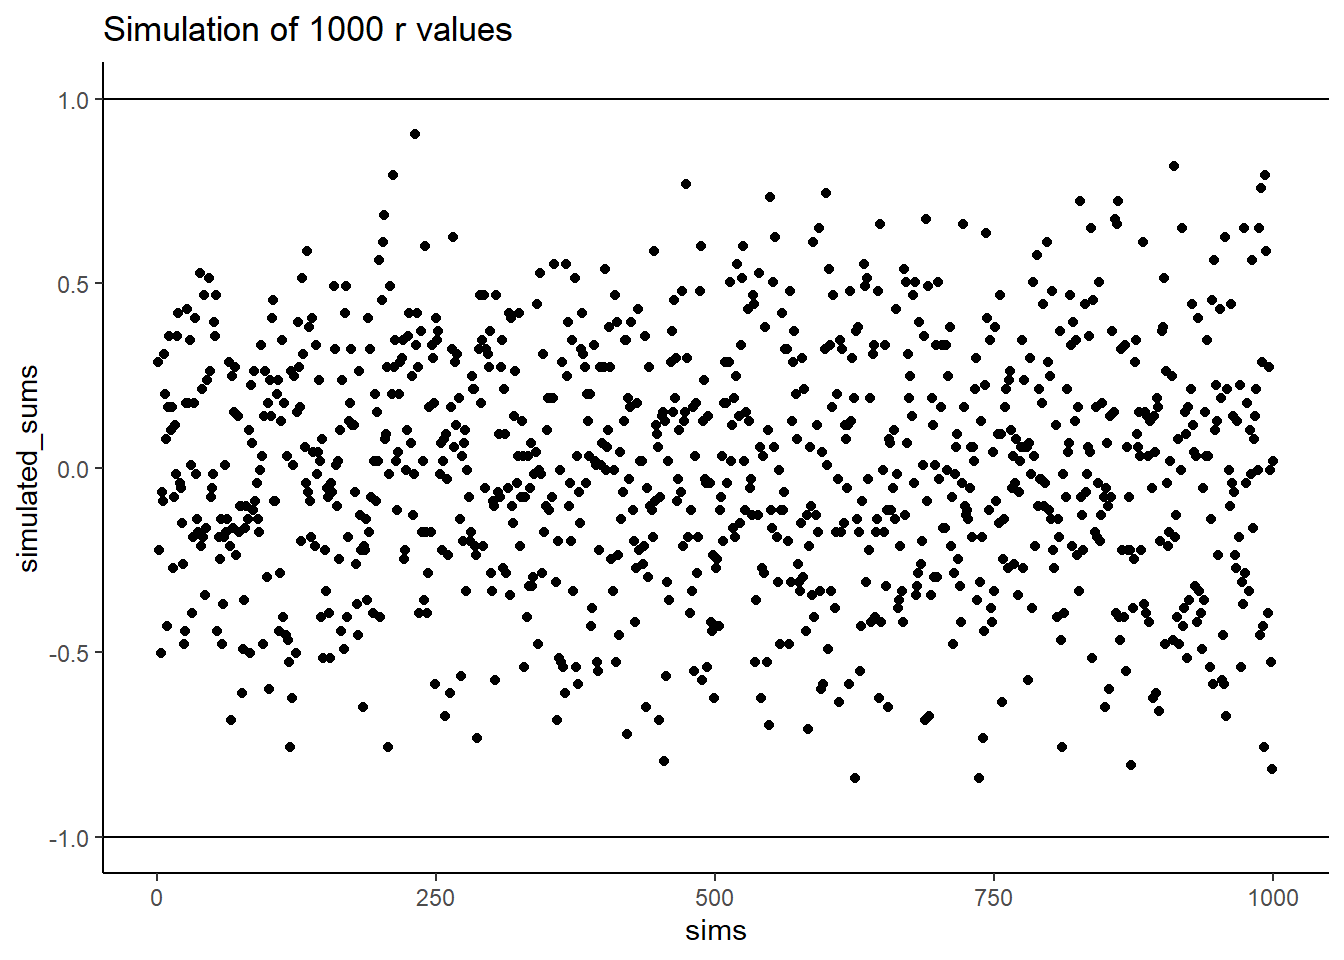 A simulation of of correlations. Each dot represents the r-value for the correlation between an X and Y variable that each contain the numbers 1 to 10 in random orders. The figure ilustrates that many r-values can be obtained by this random process